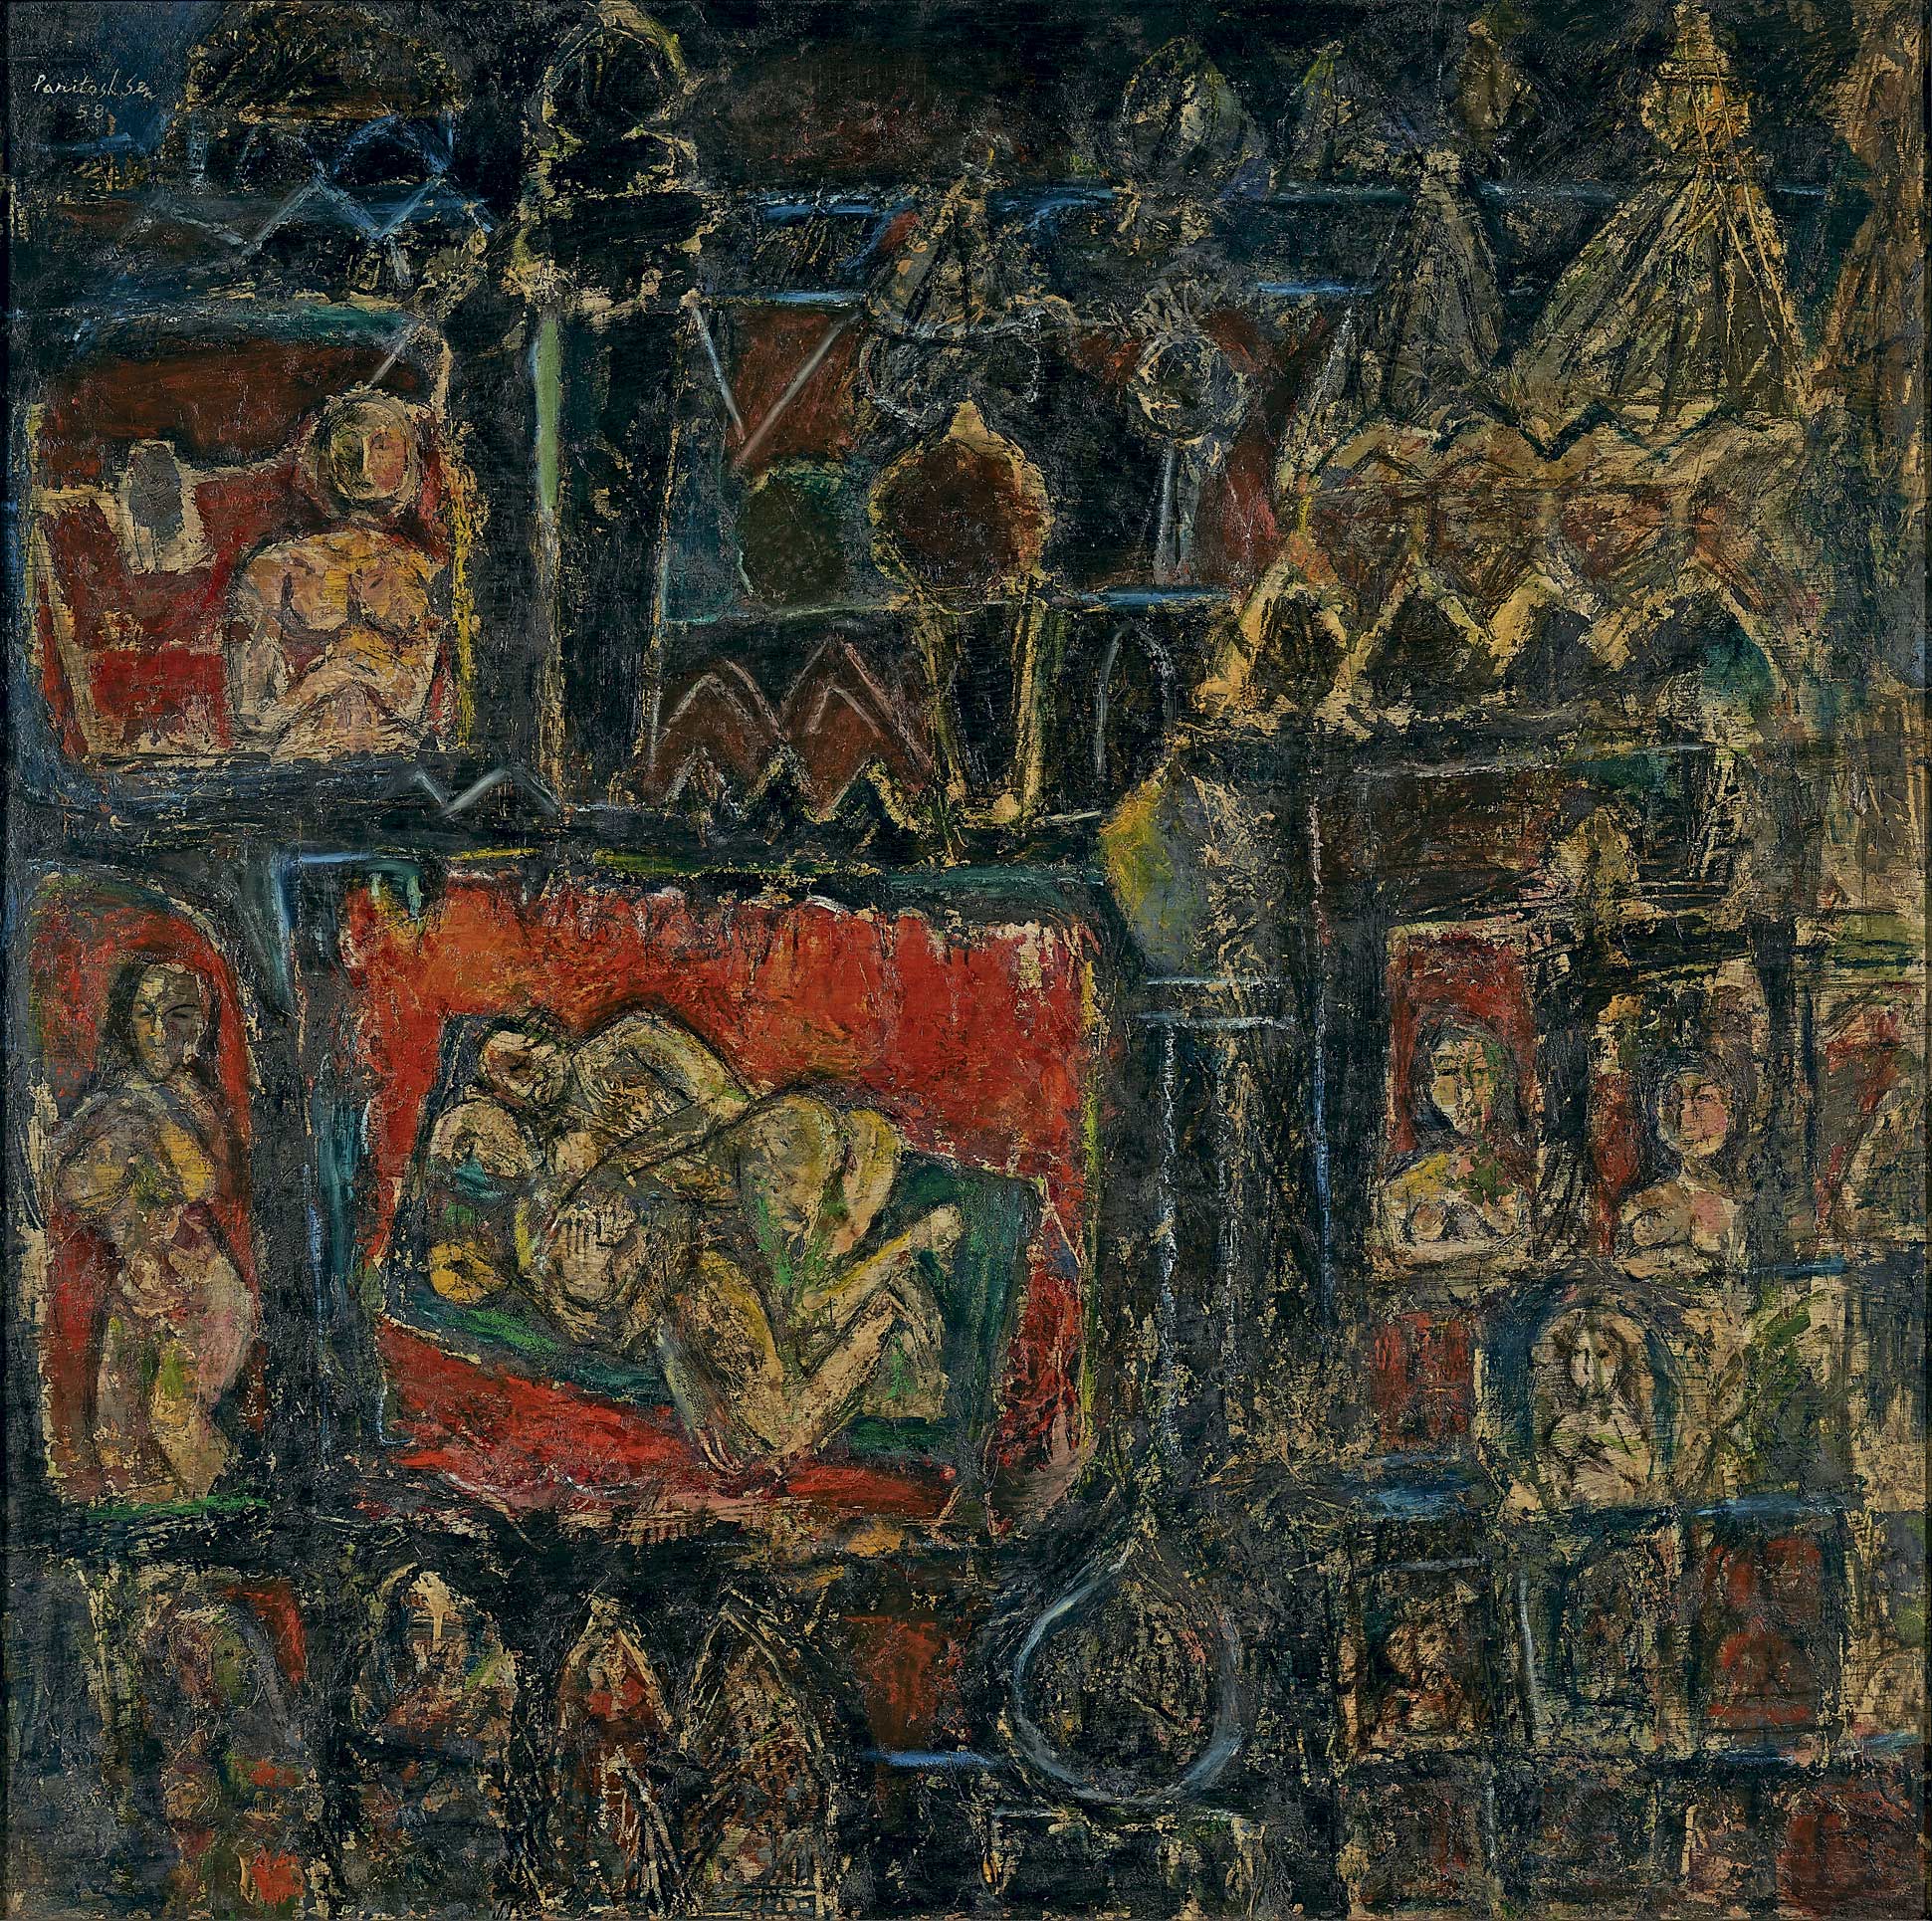  Paritosh Sen, House of Banaras, a rare work from the artist’s oeuvre from 1958, achieved an unparalleled world record price for the artist at INR 62,29,948 (US$ 87,745)